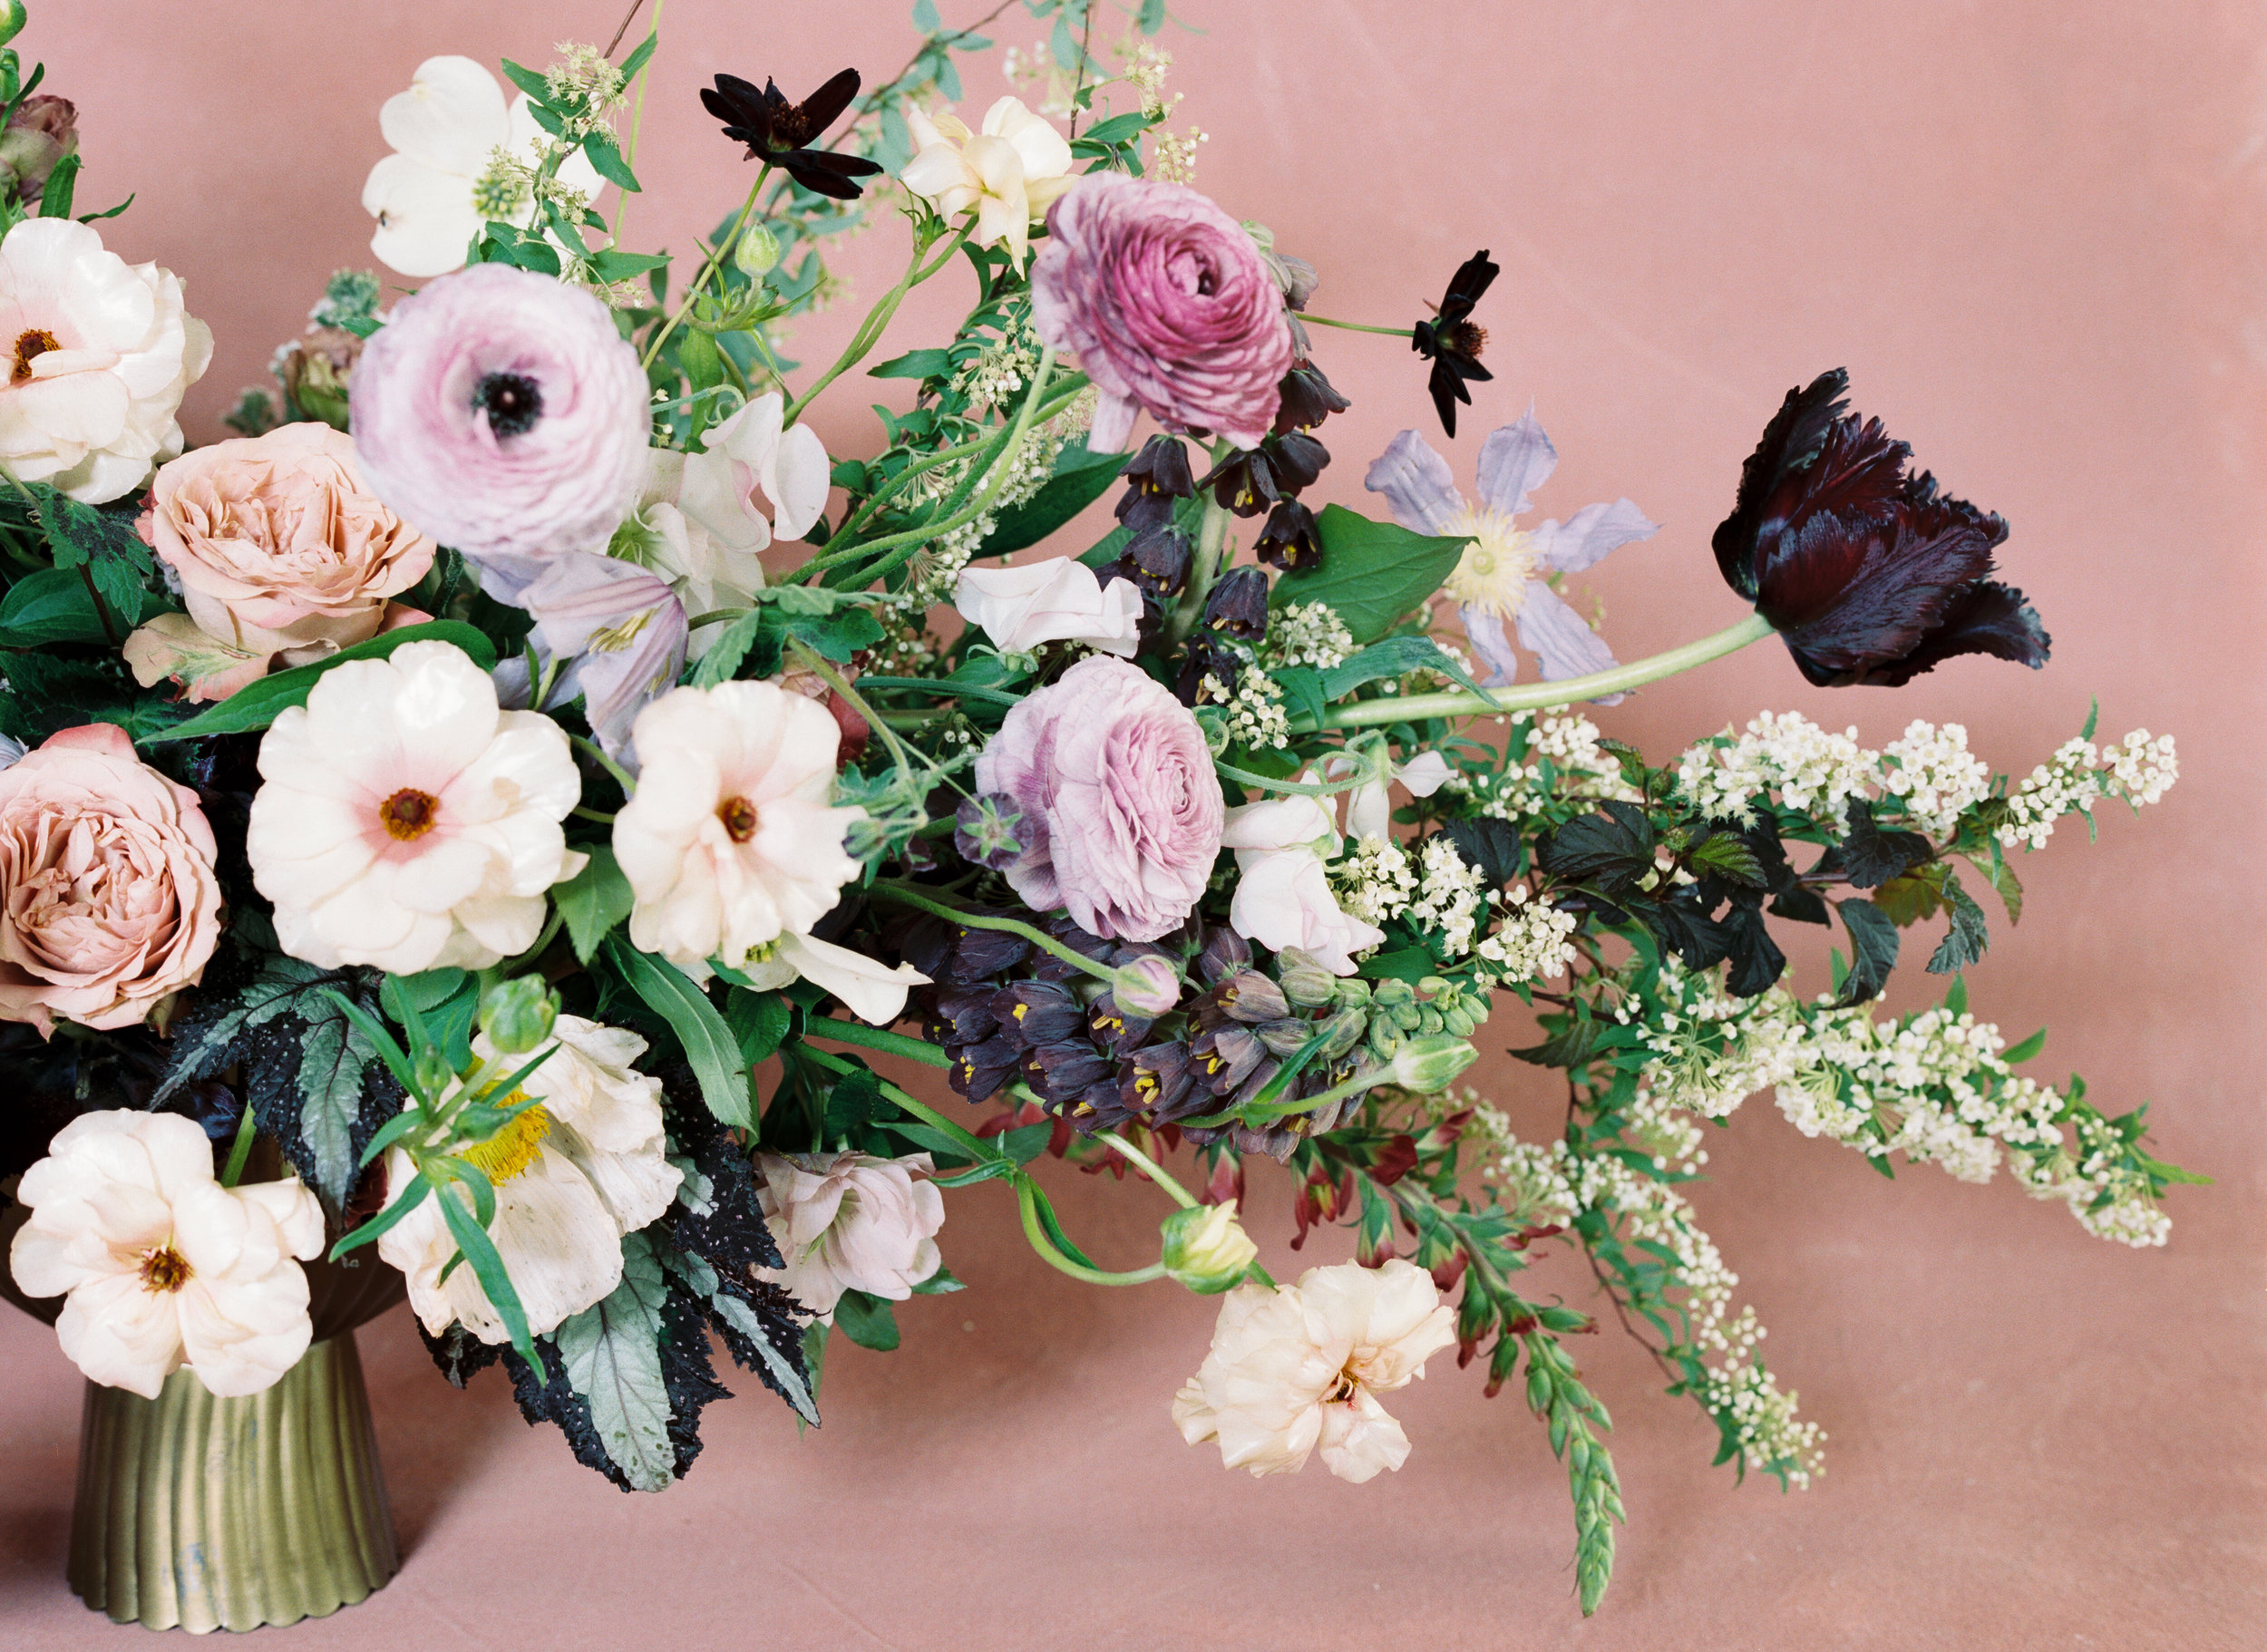 Tulips, ranunculus, garden roses and cosmos. Perfect spring wedding flowers in shades of mauve and terra cotta. Nashville Wedding Floral Designer.